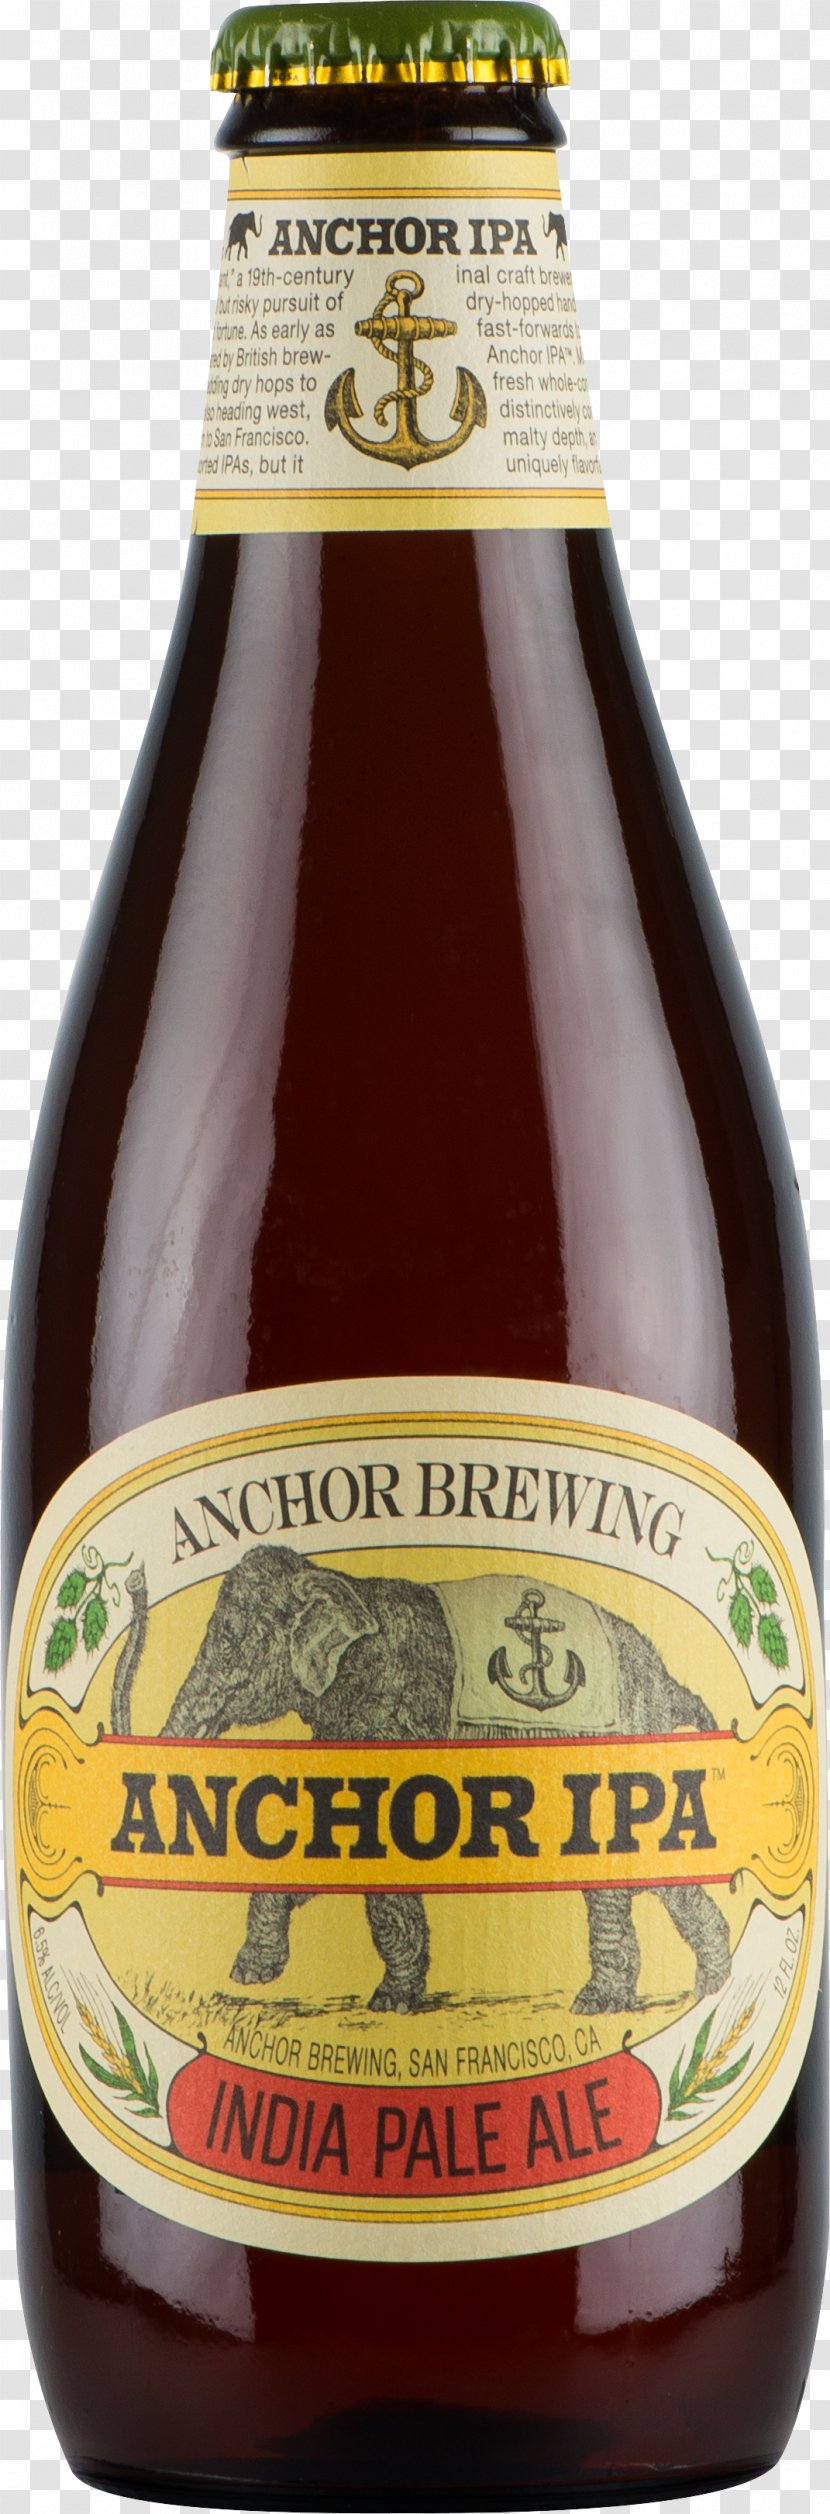 India Pale Ale Anchor Brewing Company Wheat Beer - Drink Transparent PNG